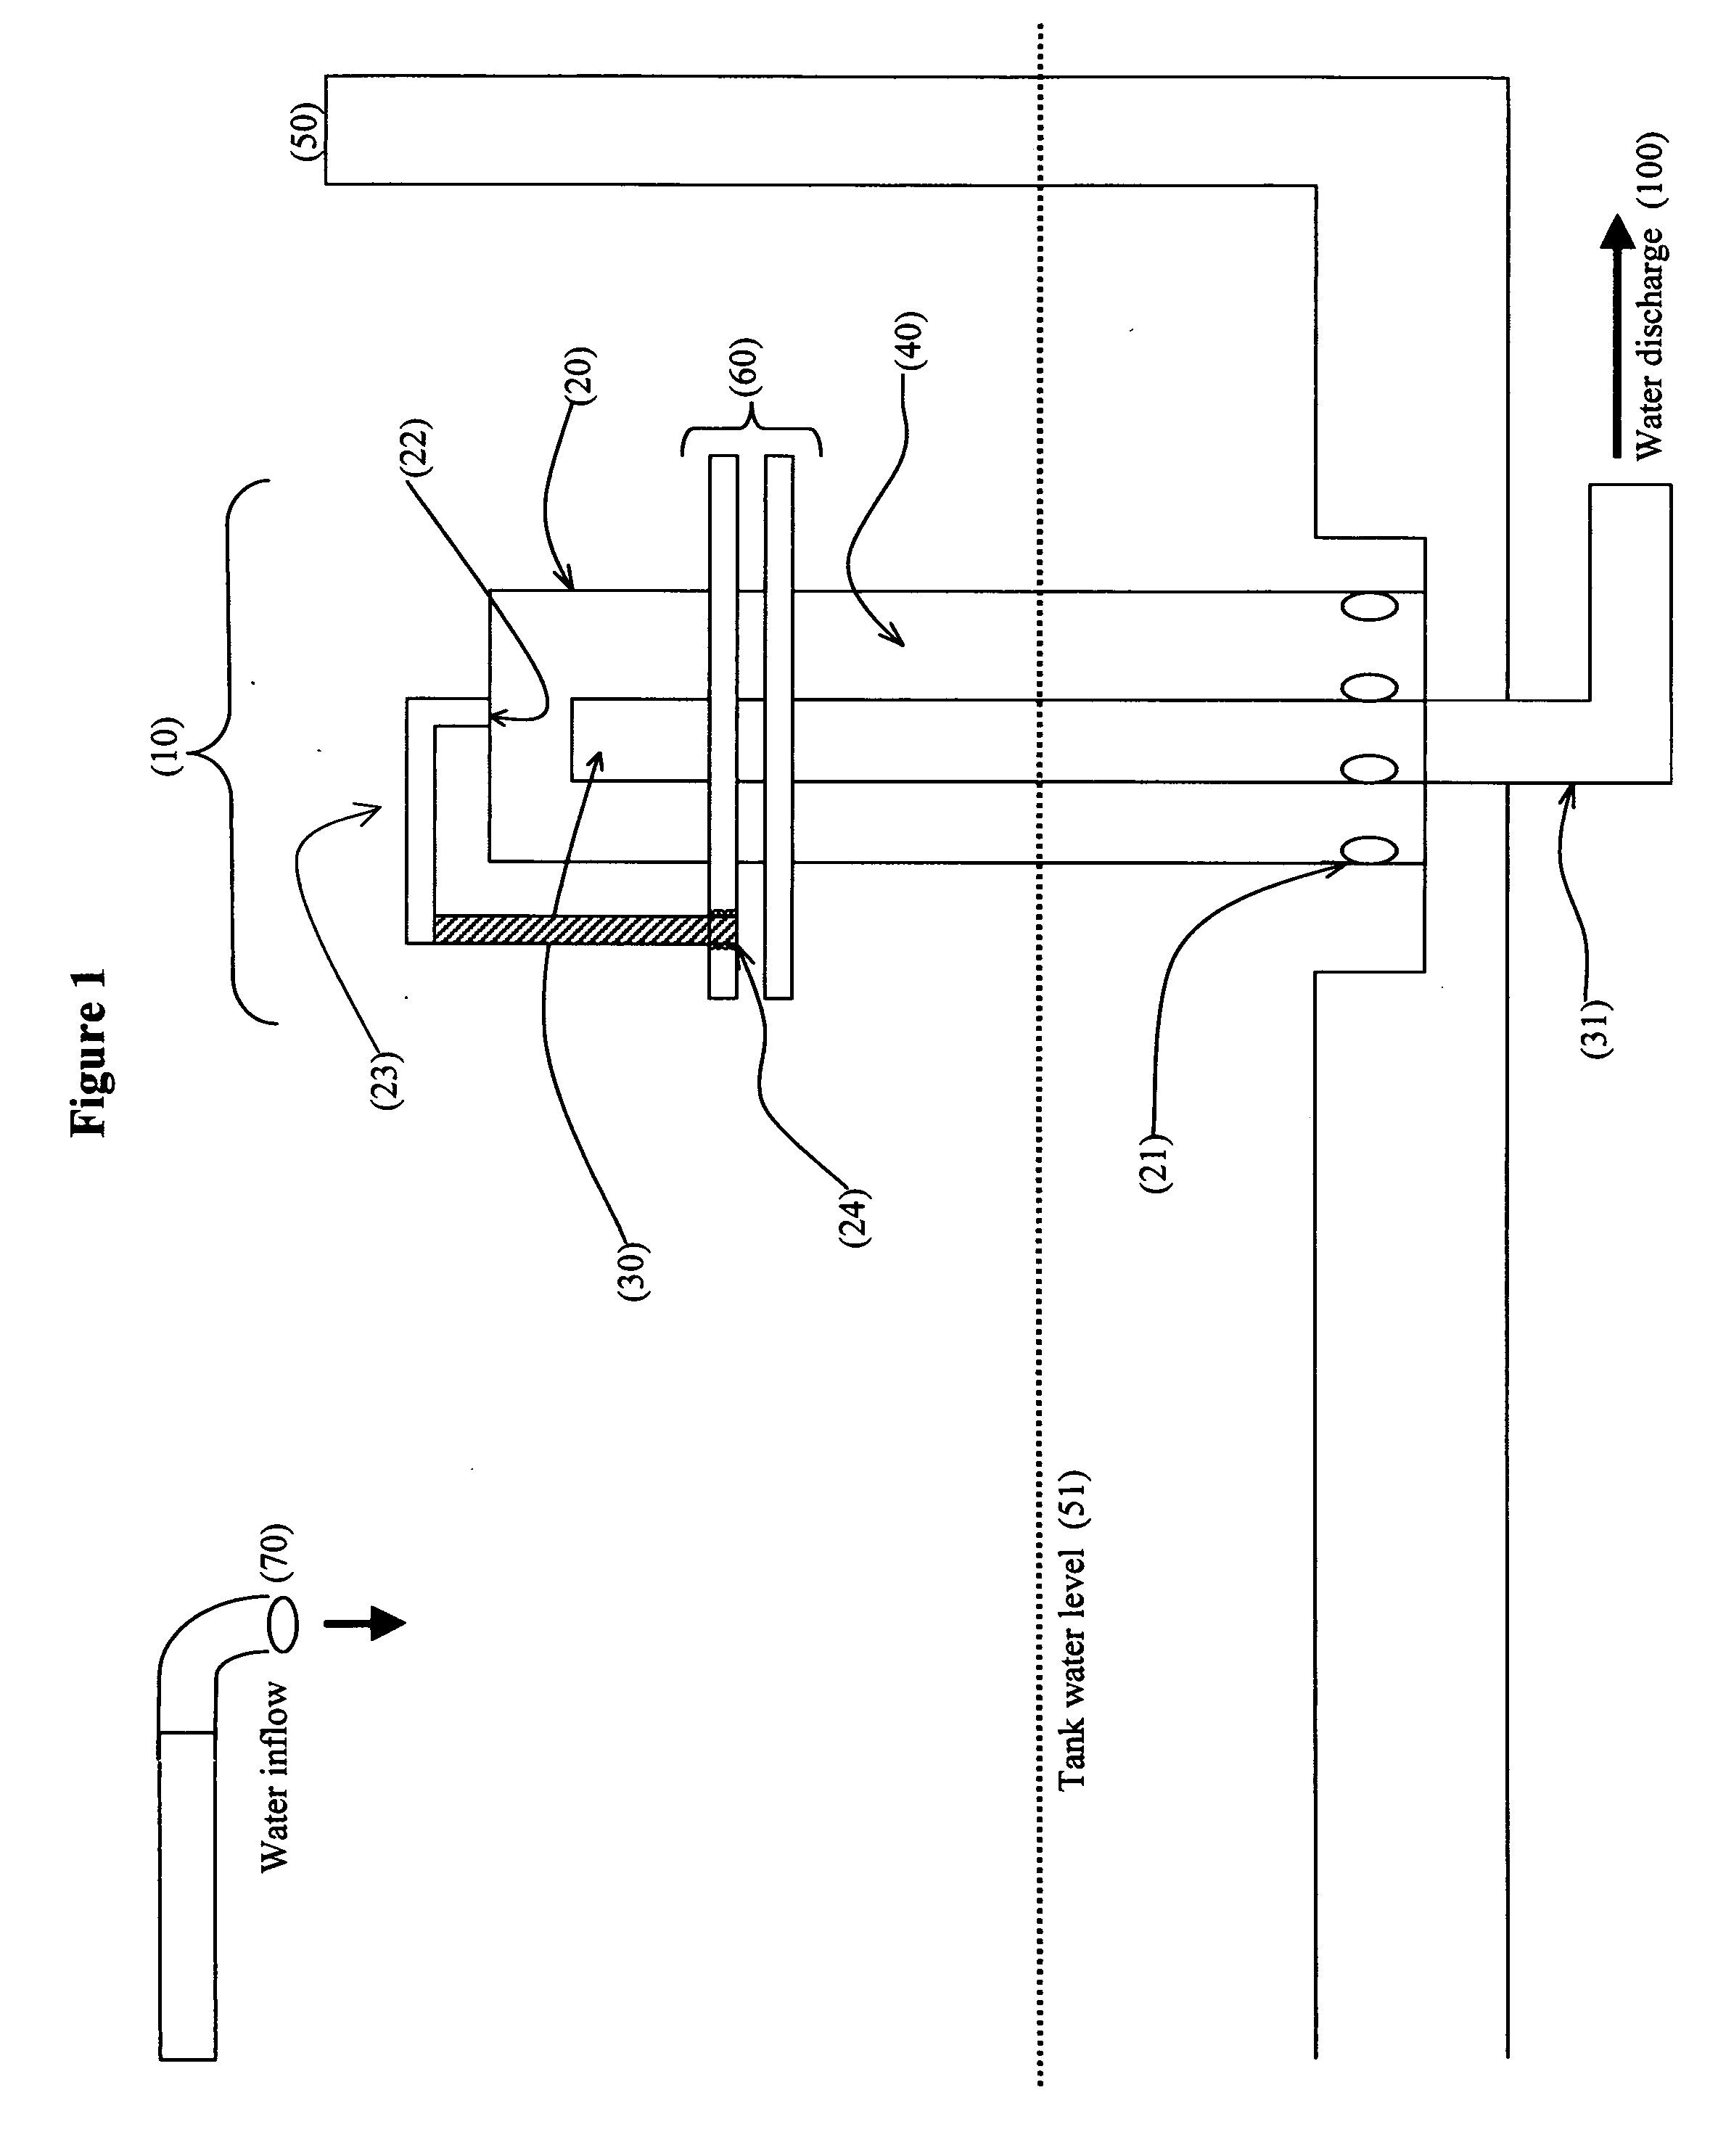 Ebb-and-flow drain and fluid-handling system